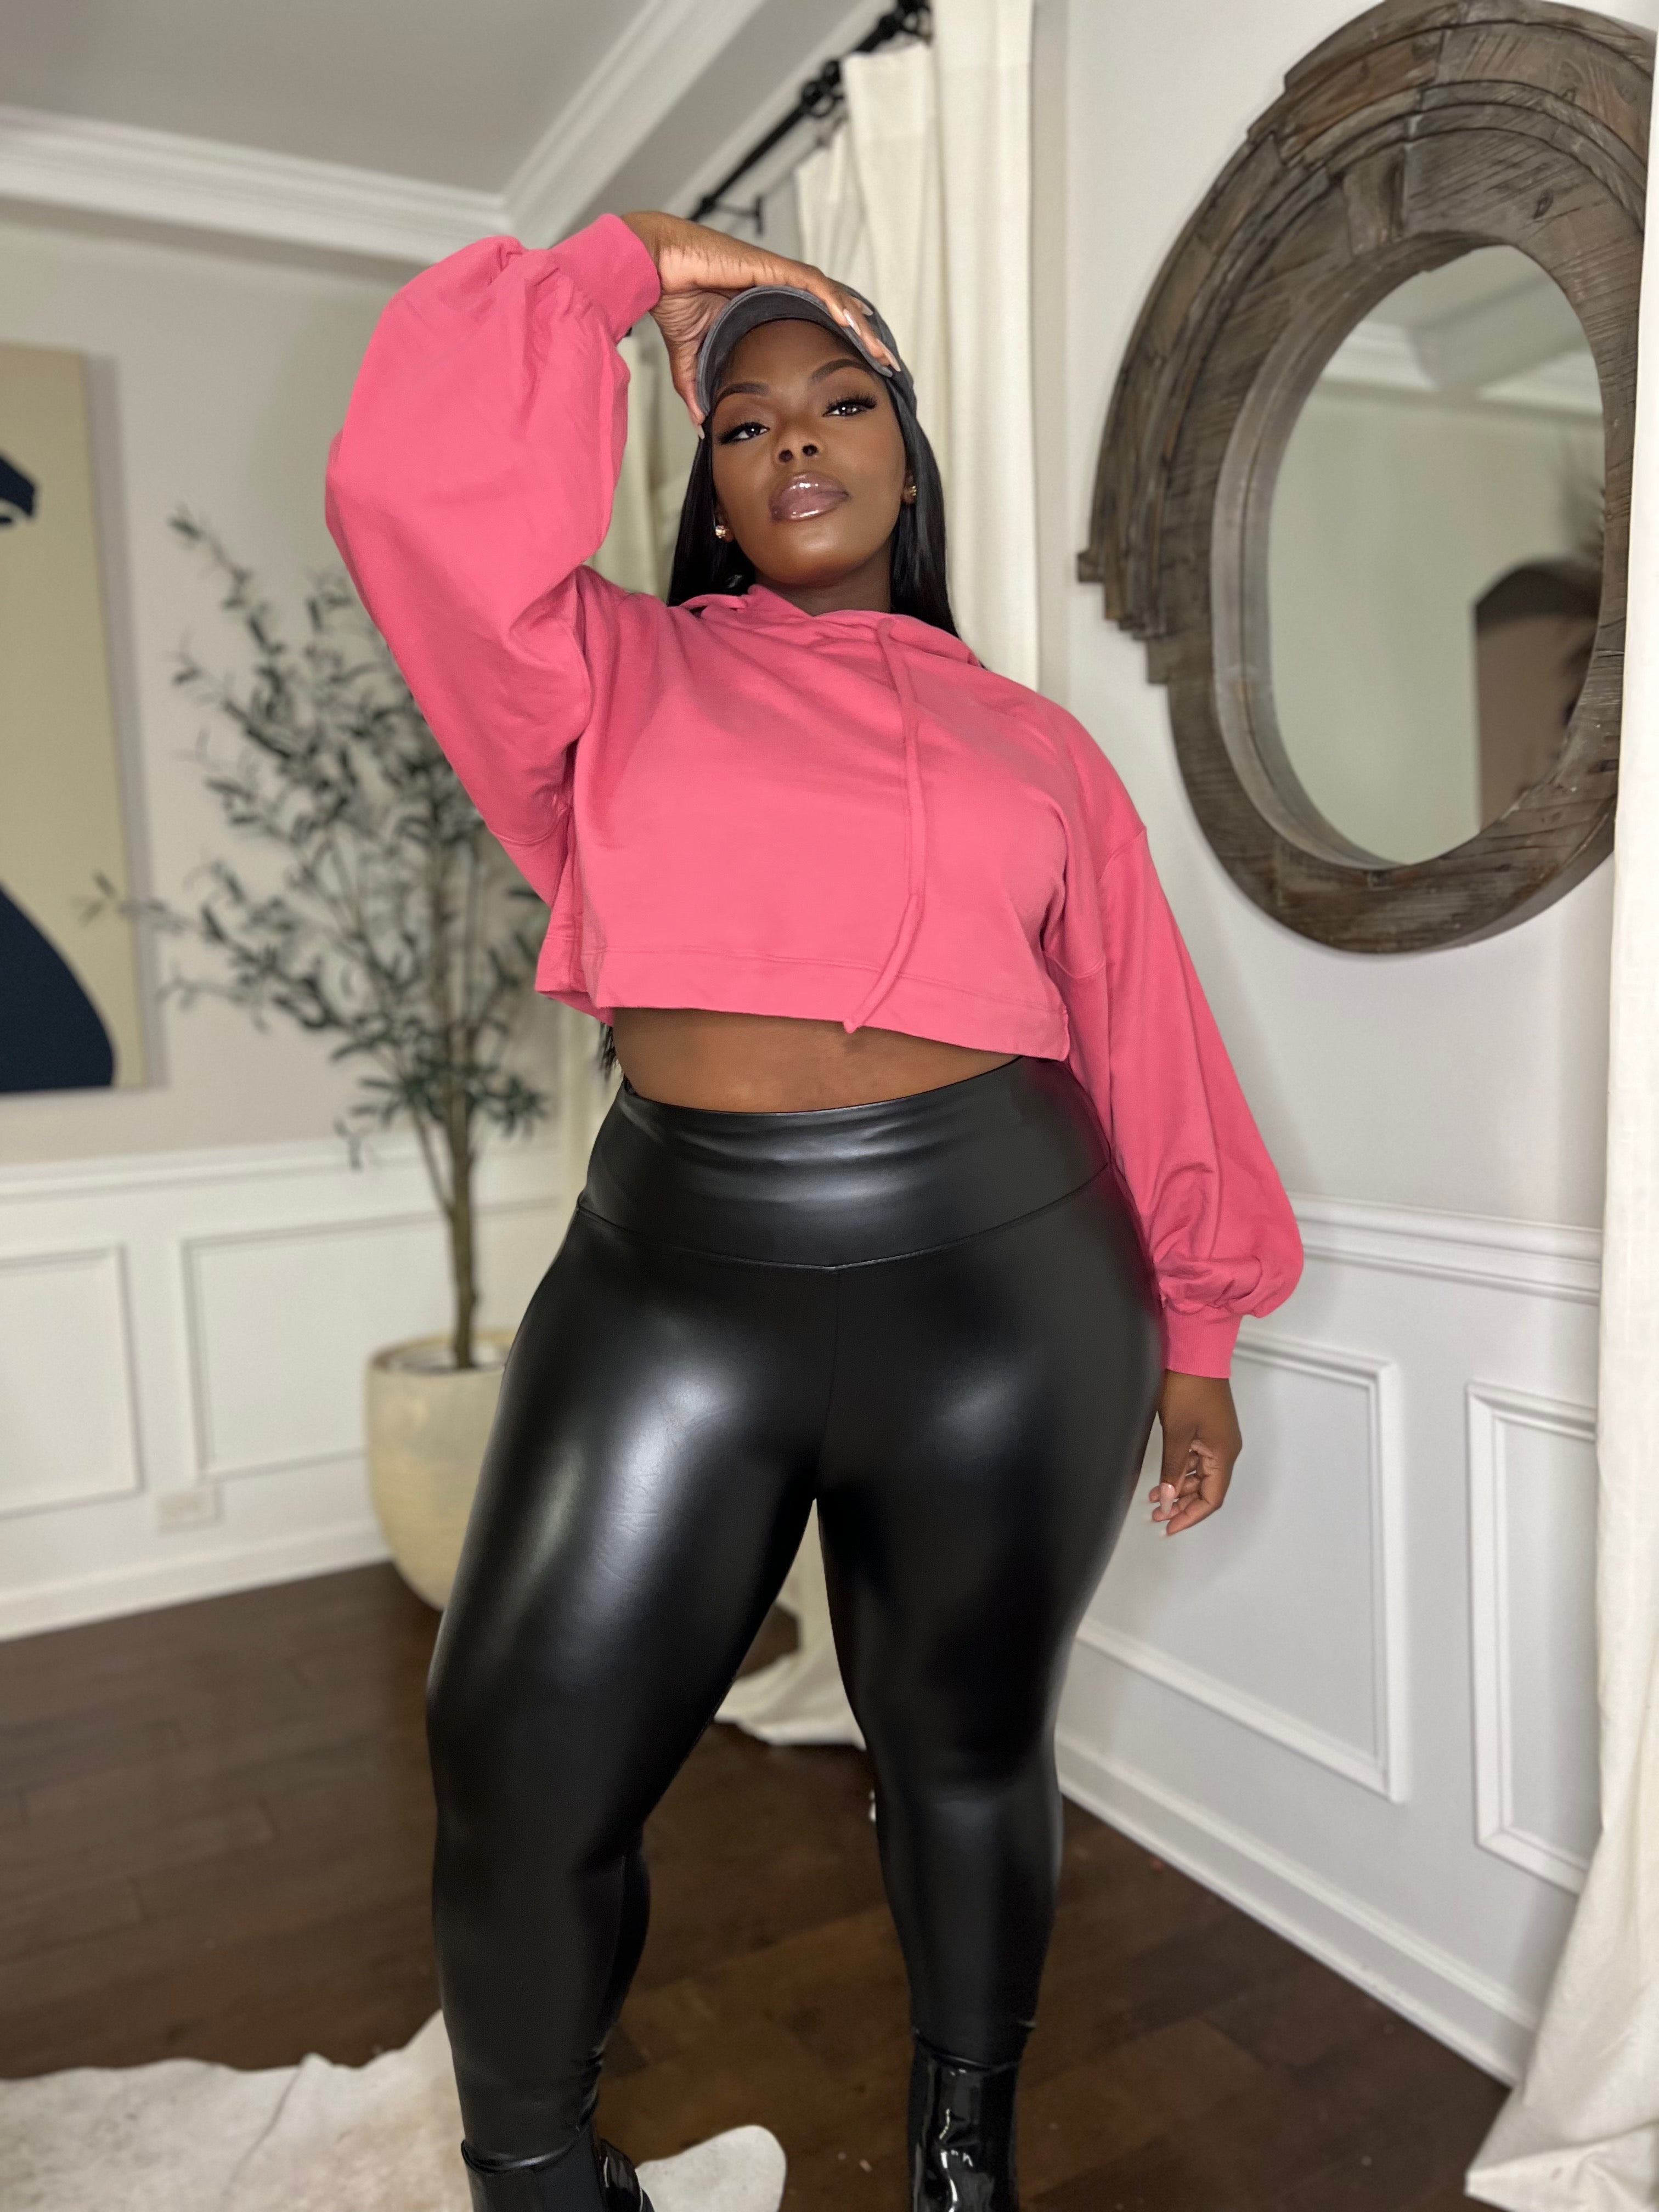 Snatched leather leggings in black